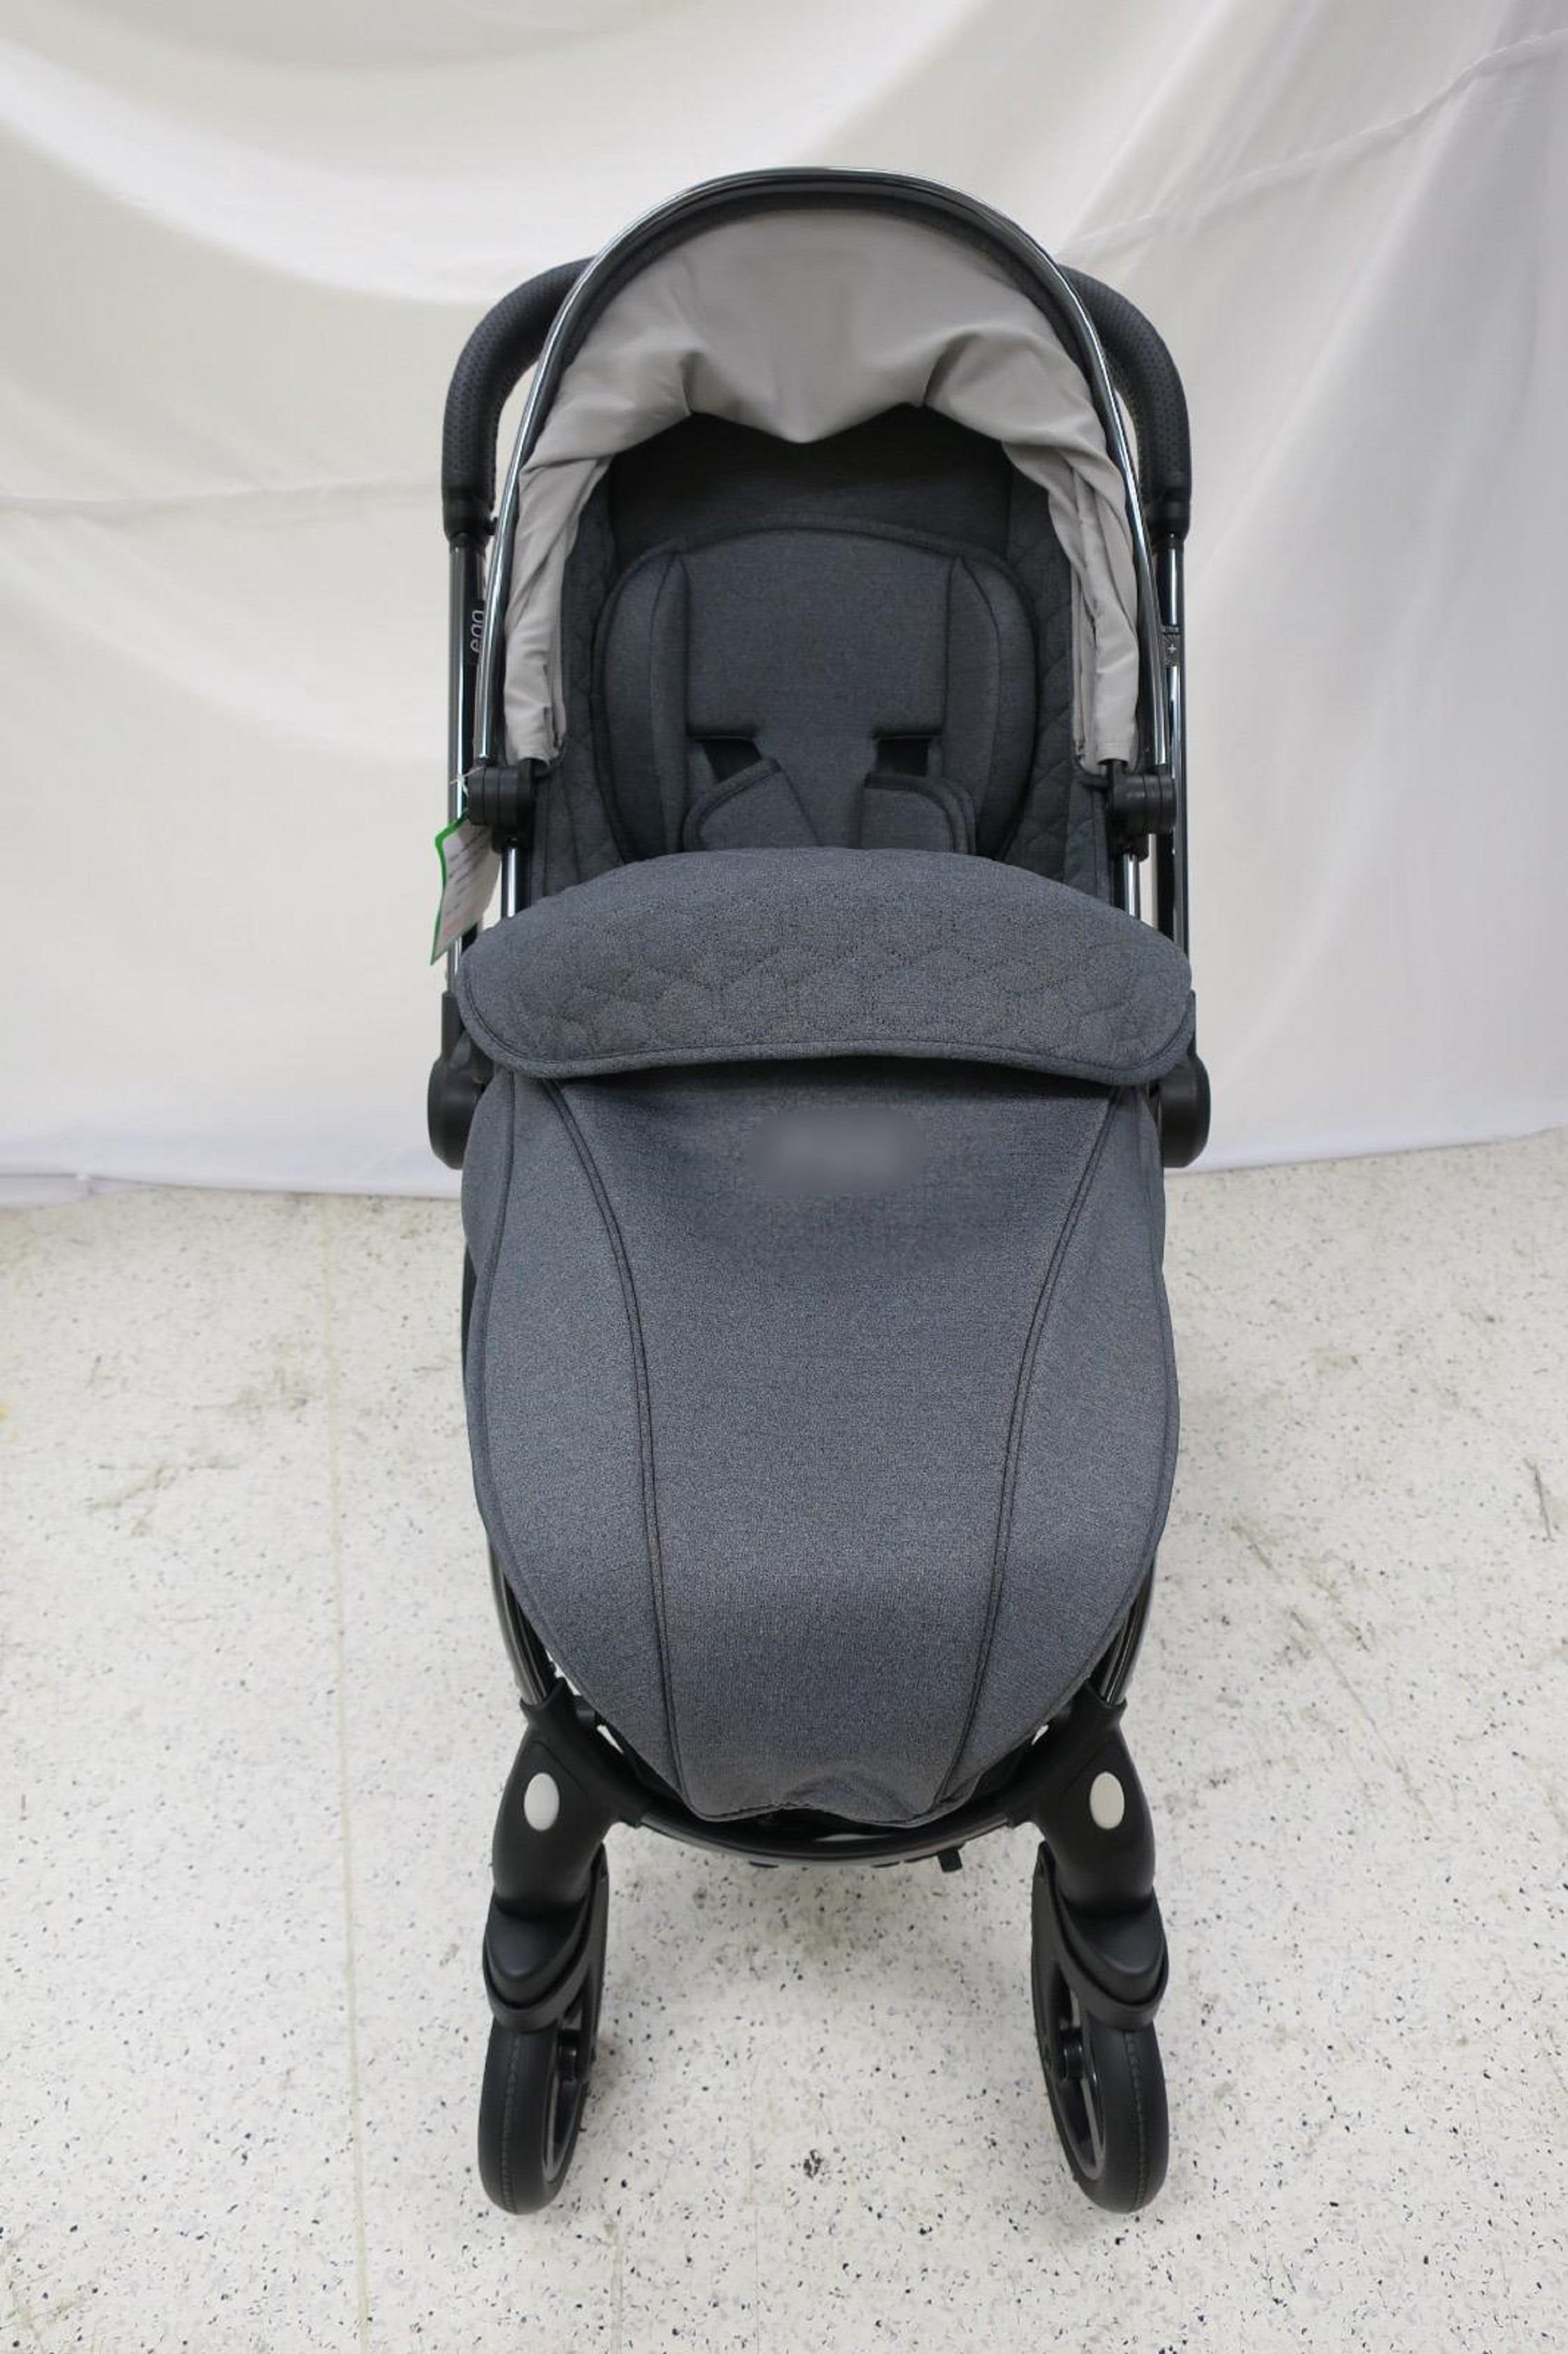 Hong Kong Customs today (June 10) reminded members of the public to stay alert to an unsafe model of a stroller. Test results indicated that the stroller could pose a risk of finger entrapment to children. Photo shows the stroller concerned.